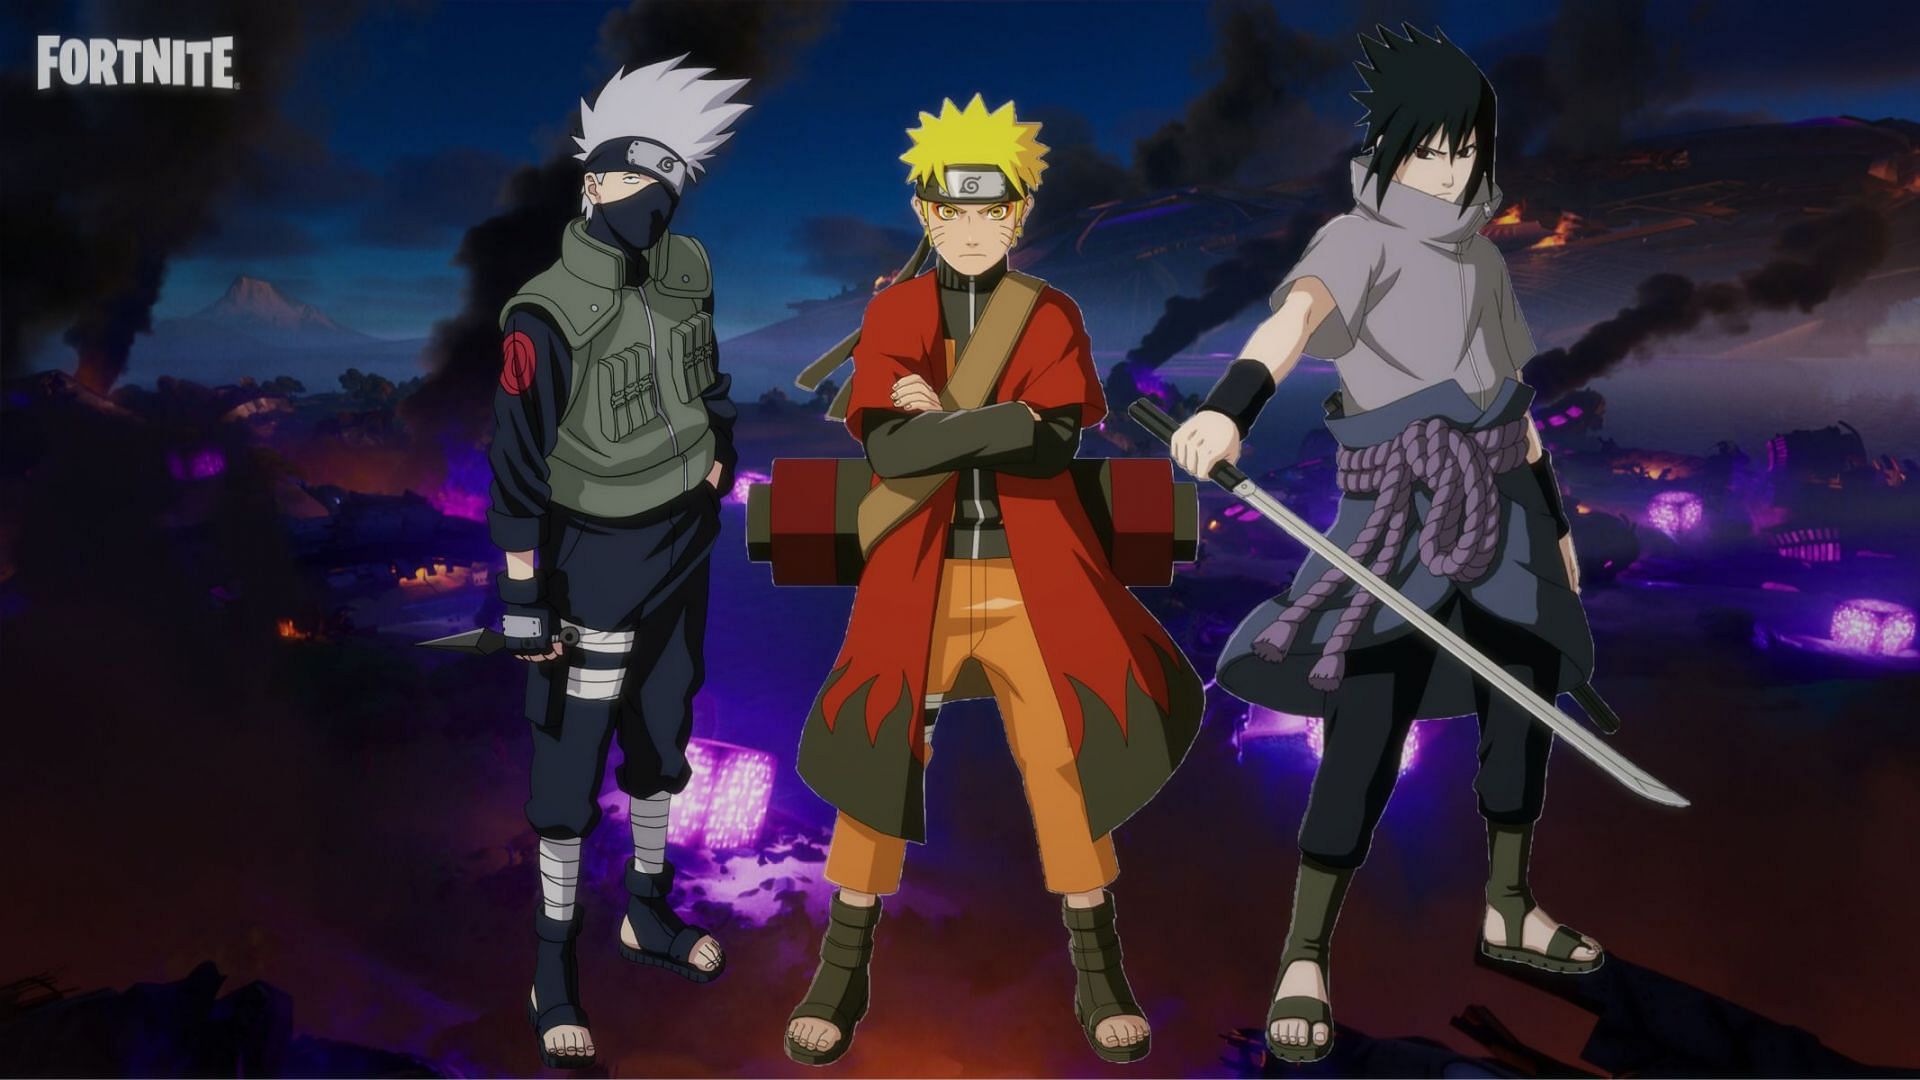 Naruto could be added to the during the Fortnite v18.40 update (Image via Sportskeeda)